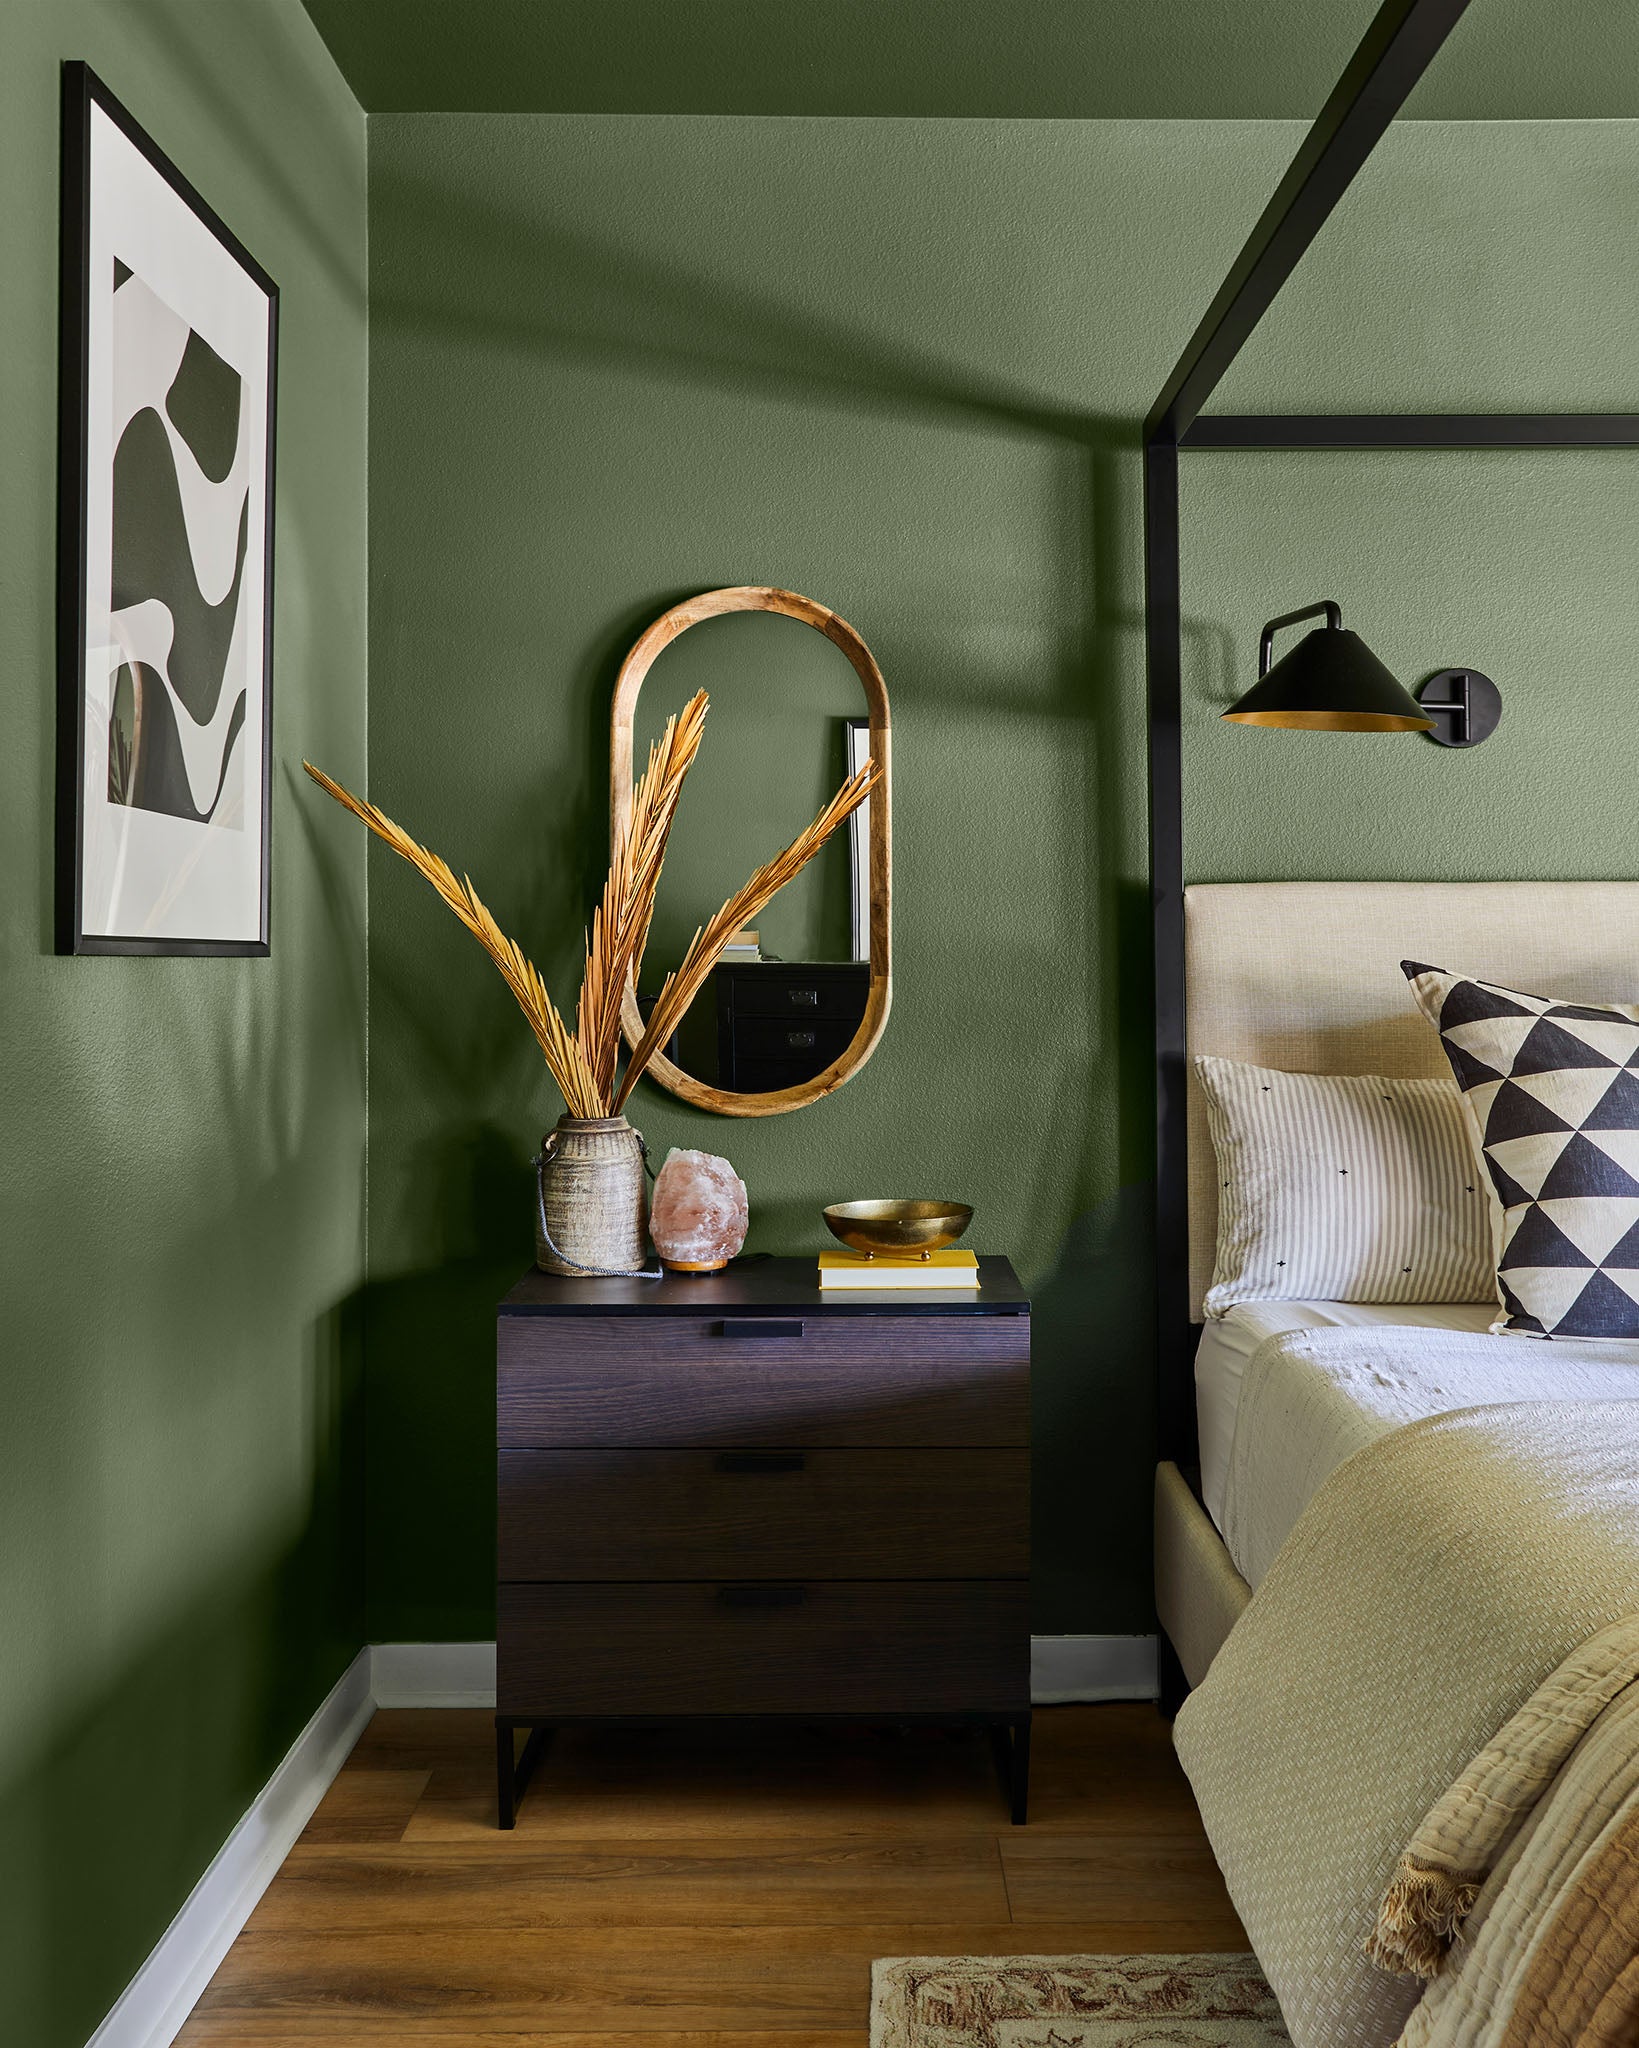 How to Pull Off a Bold Look with a Cool Bedroom Design – Clare